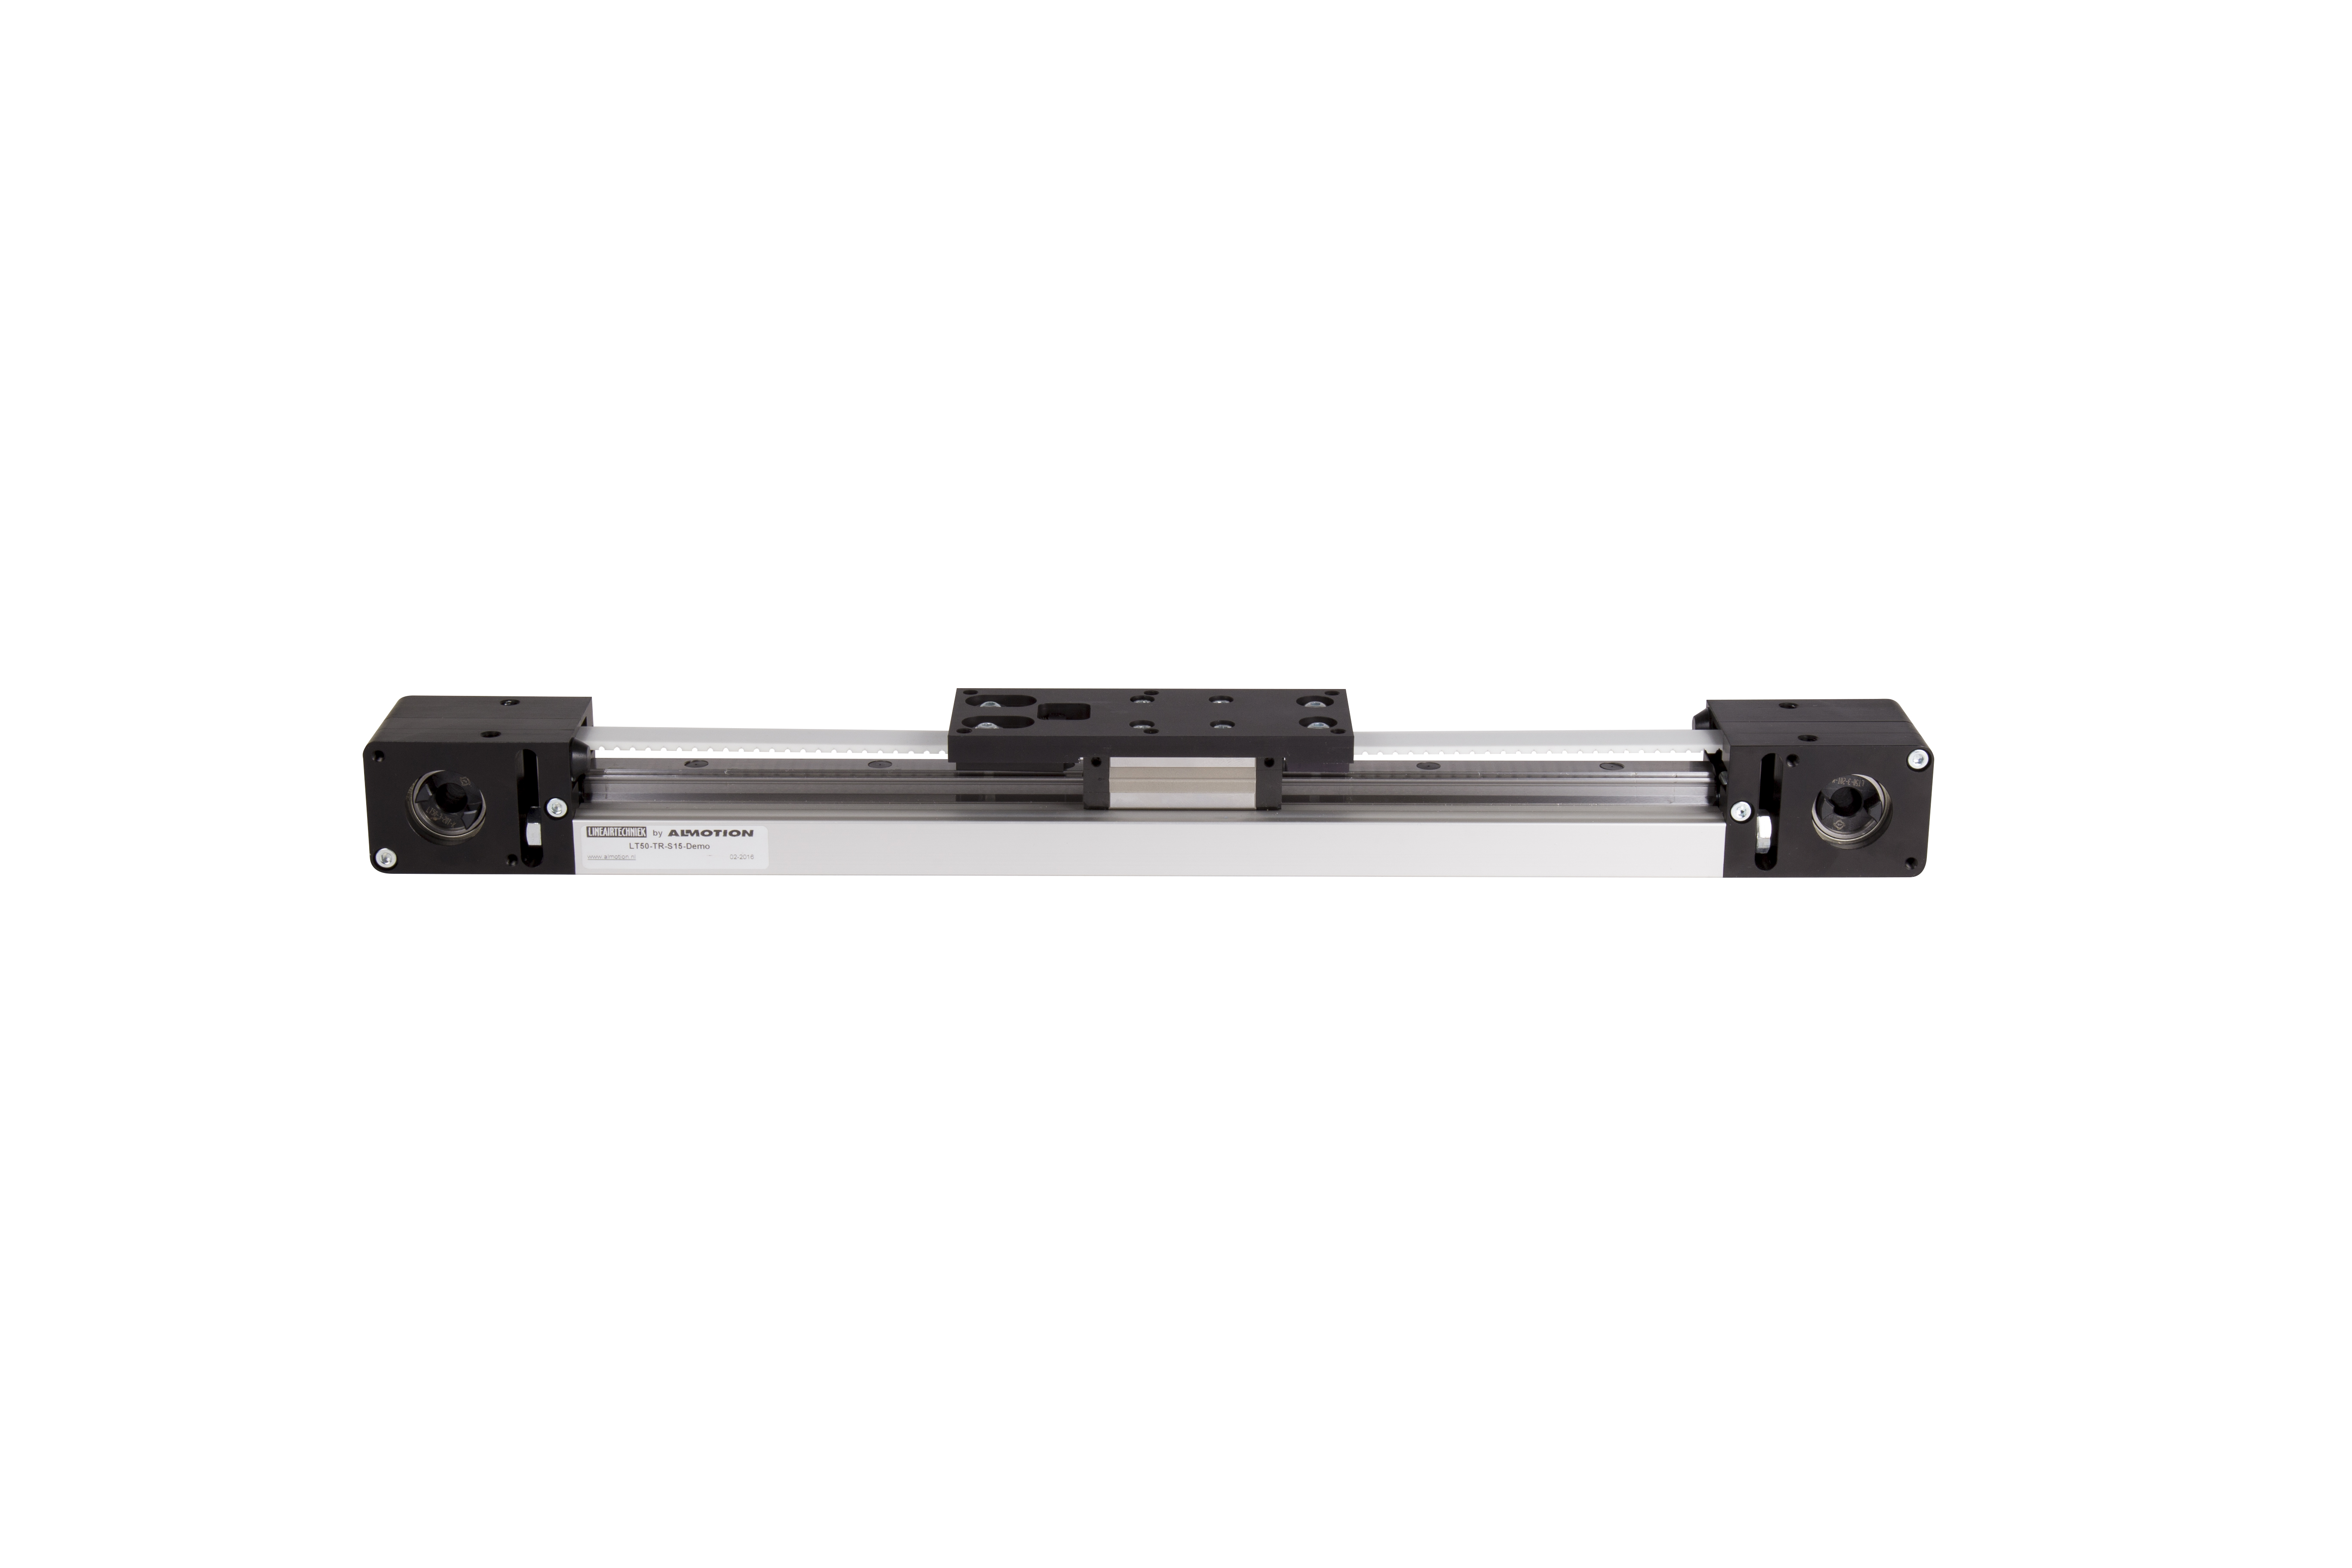 LT50-TR-S15 Guide rail with one LM Block